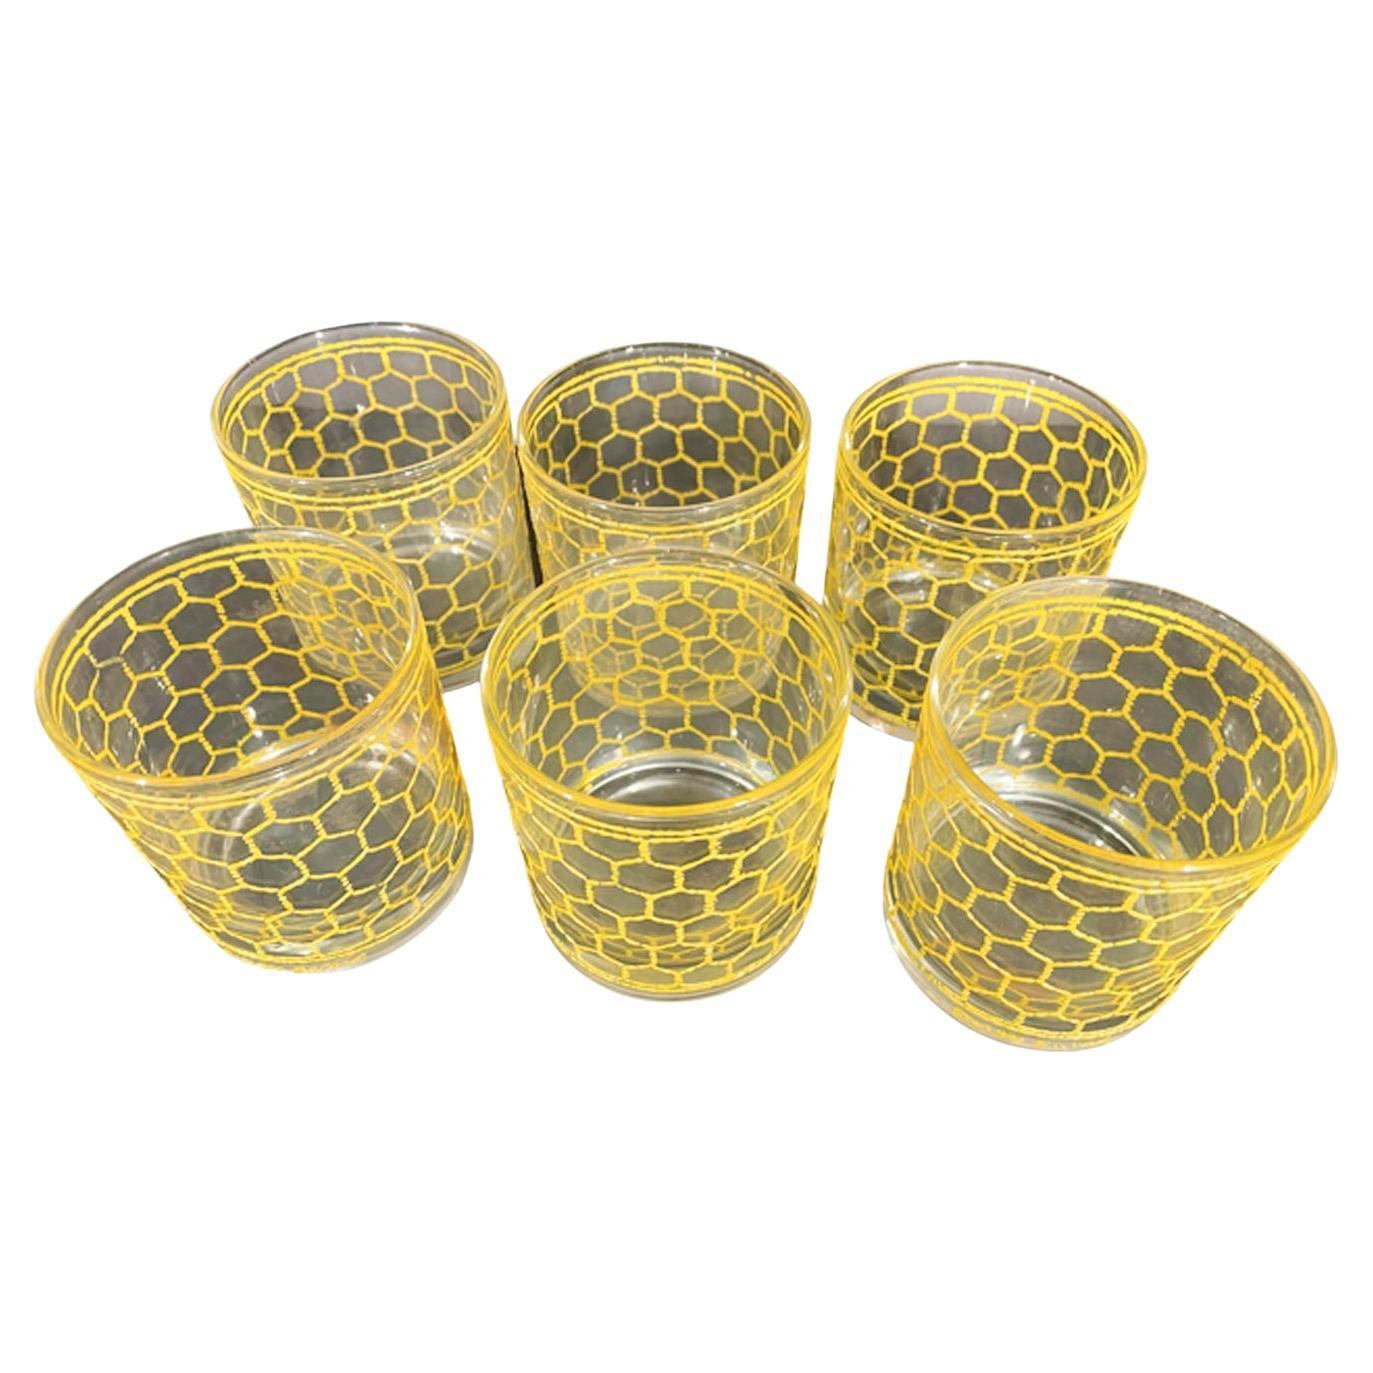 Six Vintage Georges Briard Rocks Glasses in the Wire Pattern in Ice Yellow